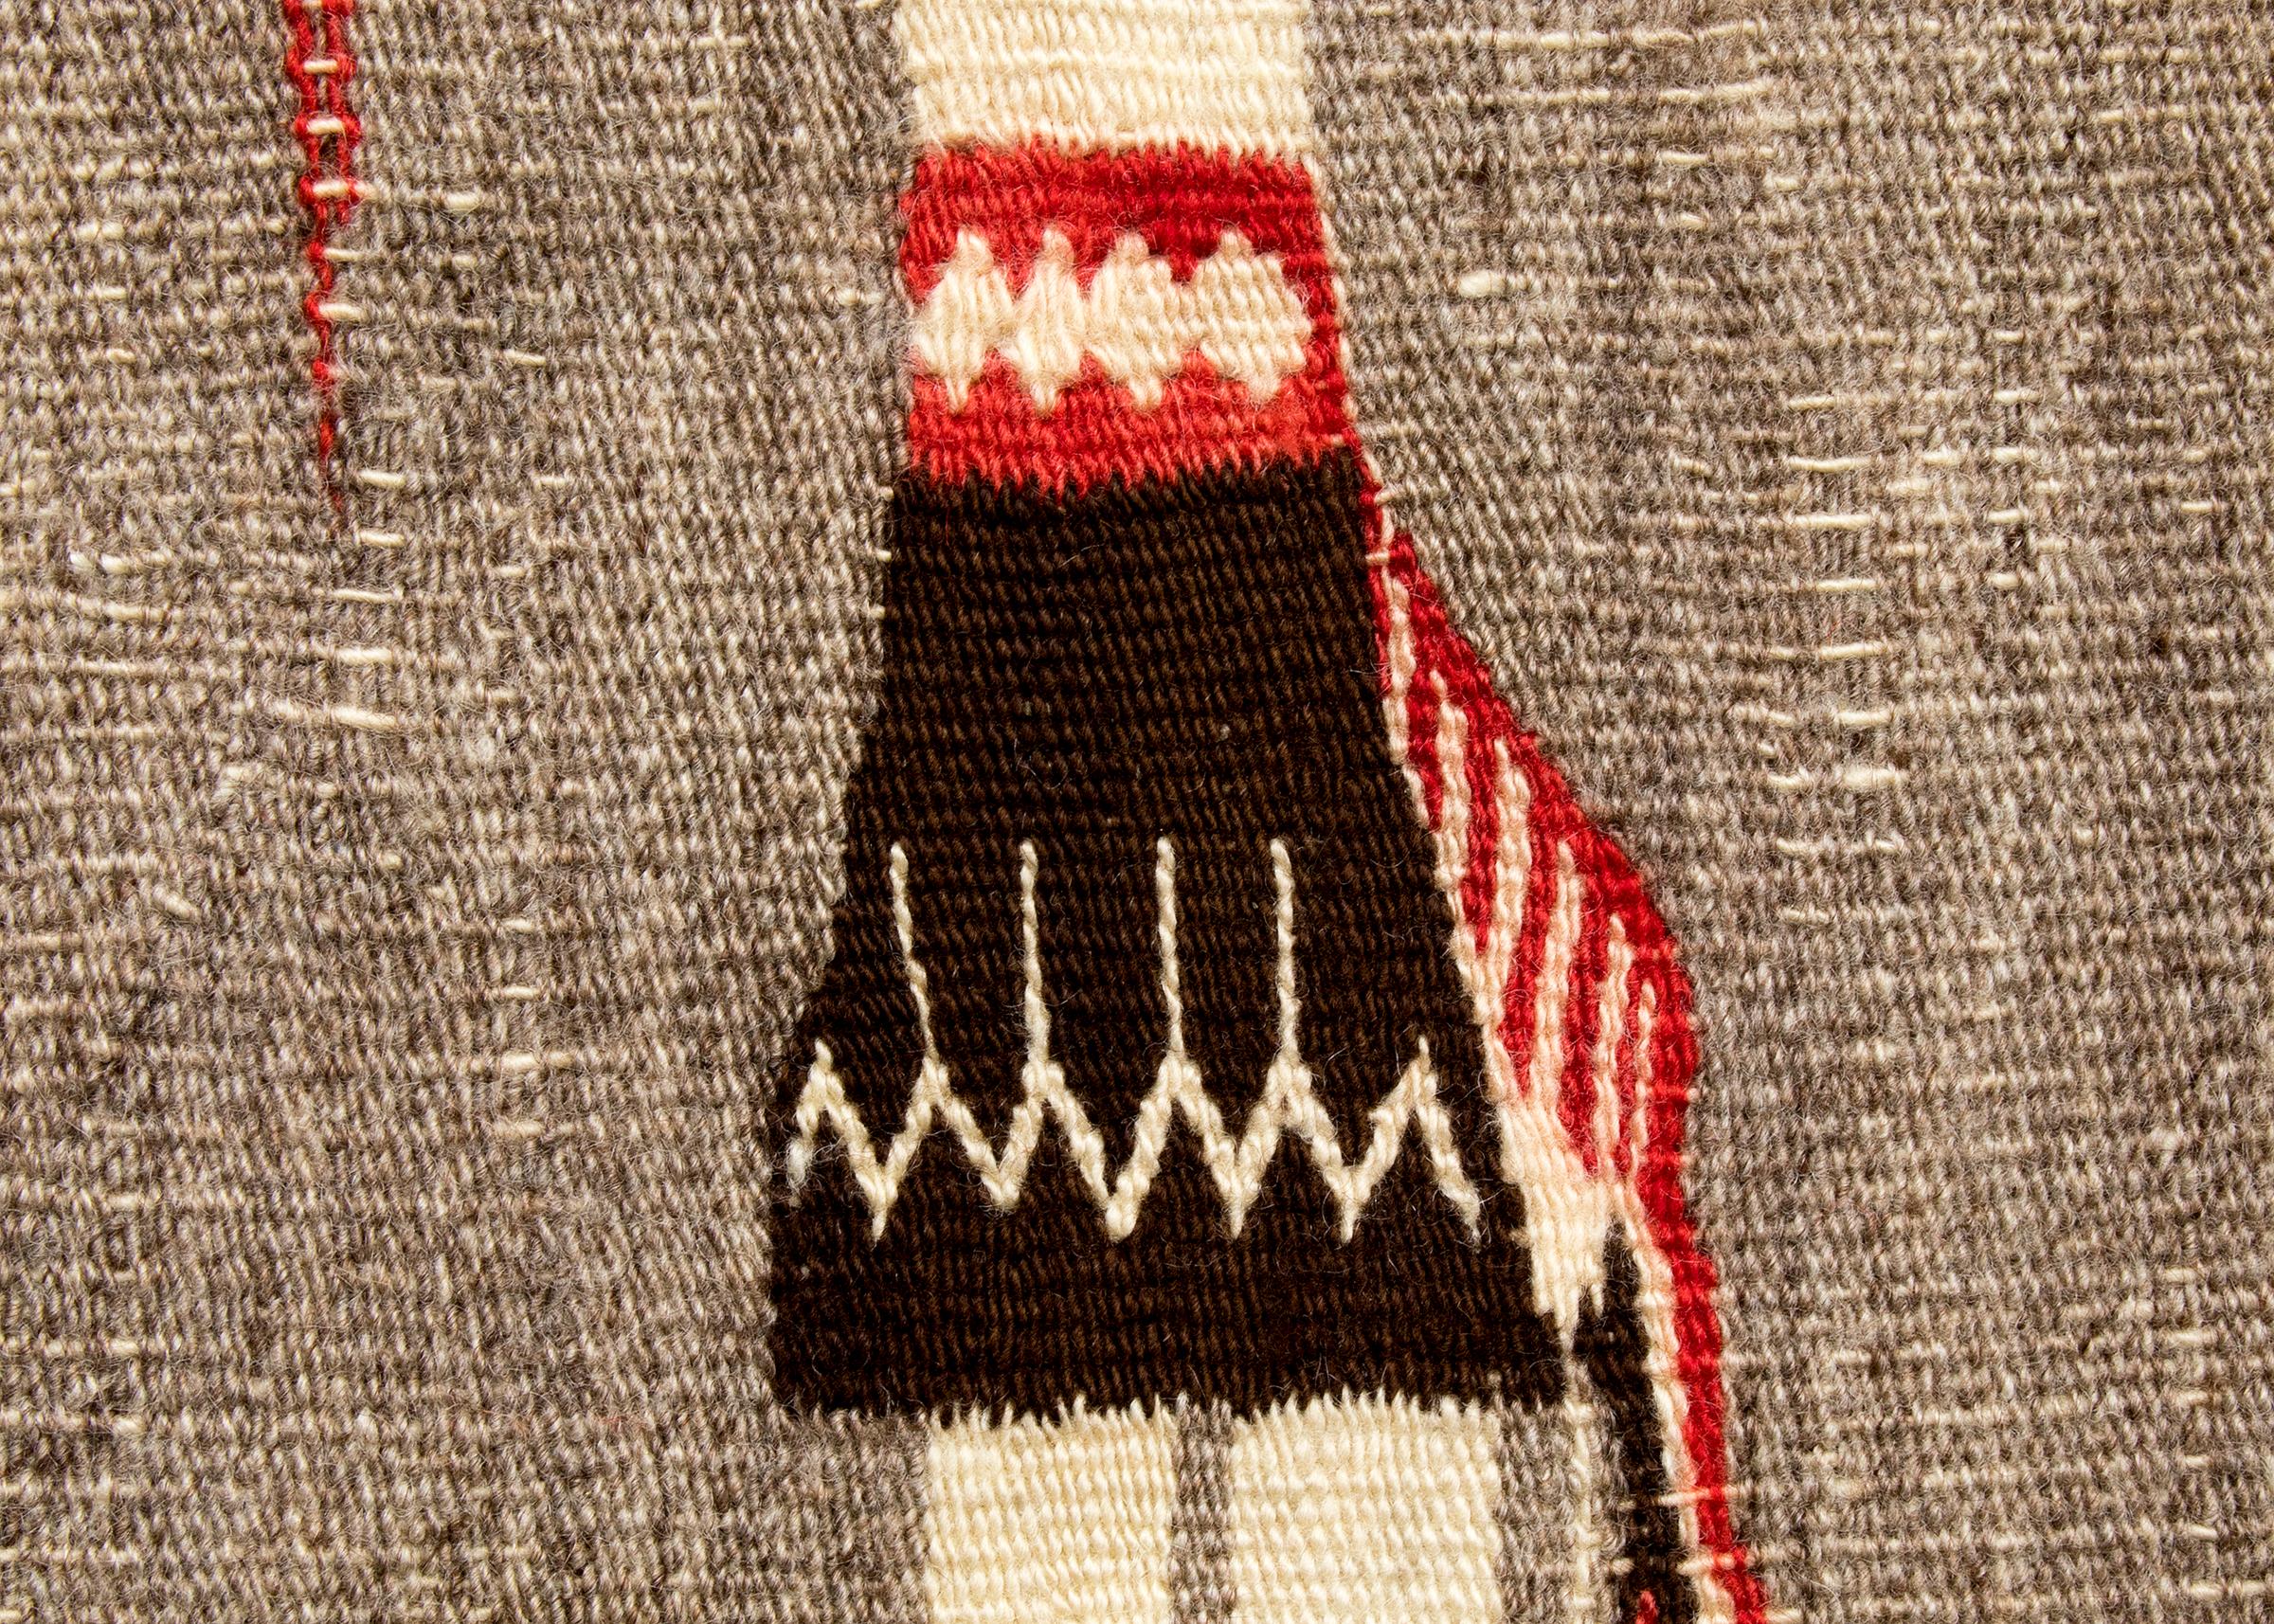 Mid-20th Century Large Navajo Pictorial Yei Rug, Vintage circa 1930s, Brown Black Red White Gray